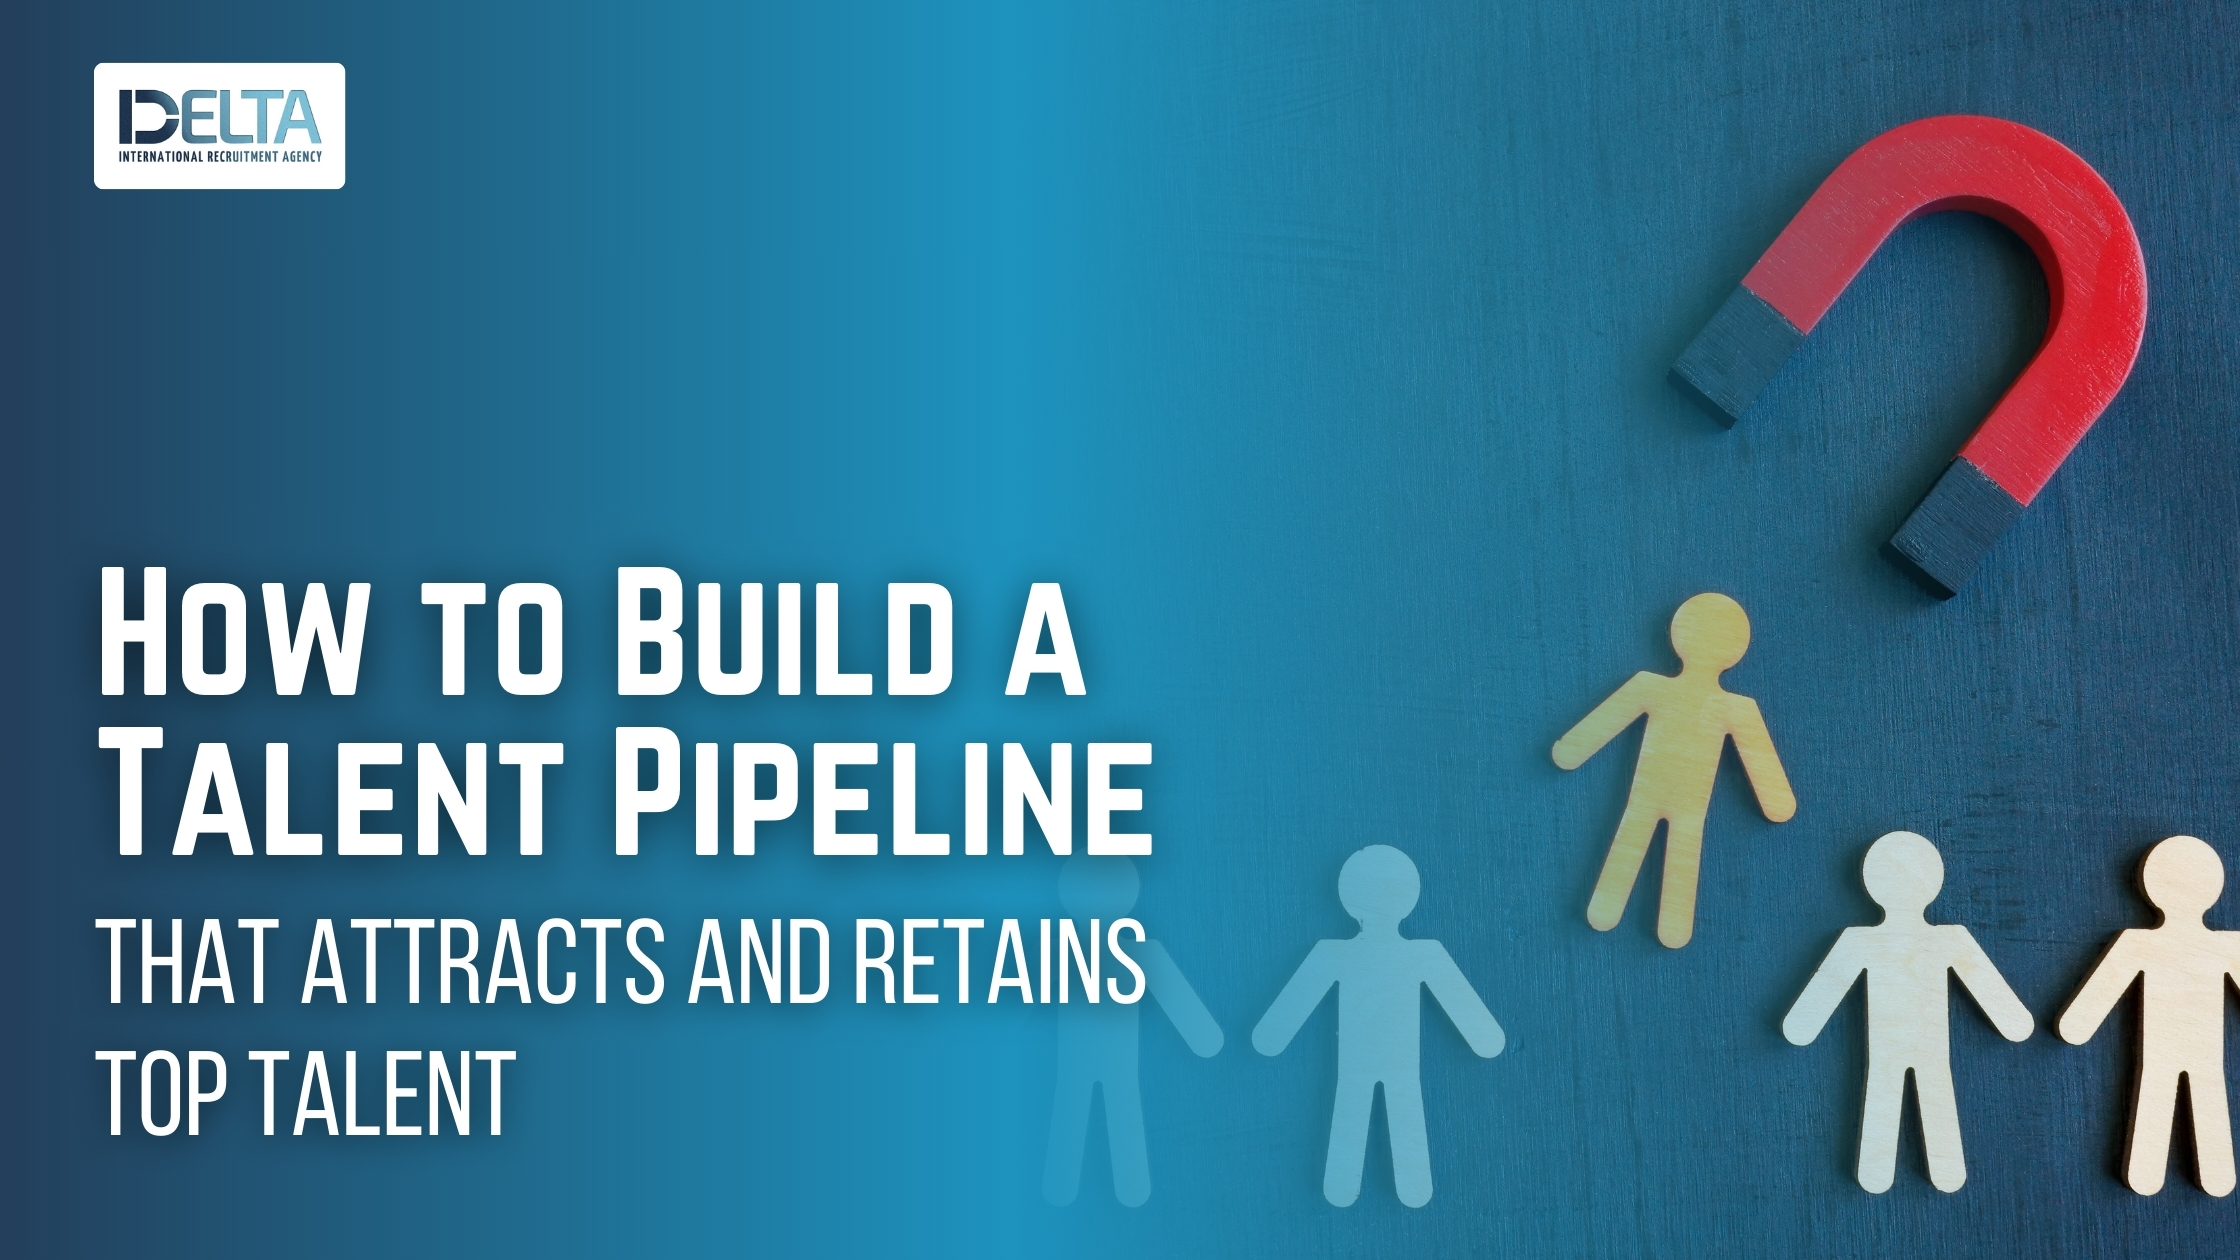 How to Build a Talent Pipeline That Attracts and Retains Top Talent